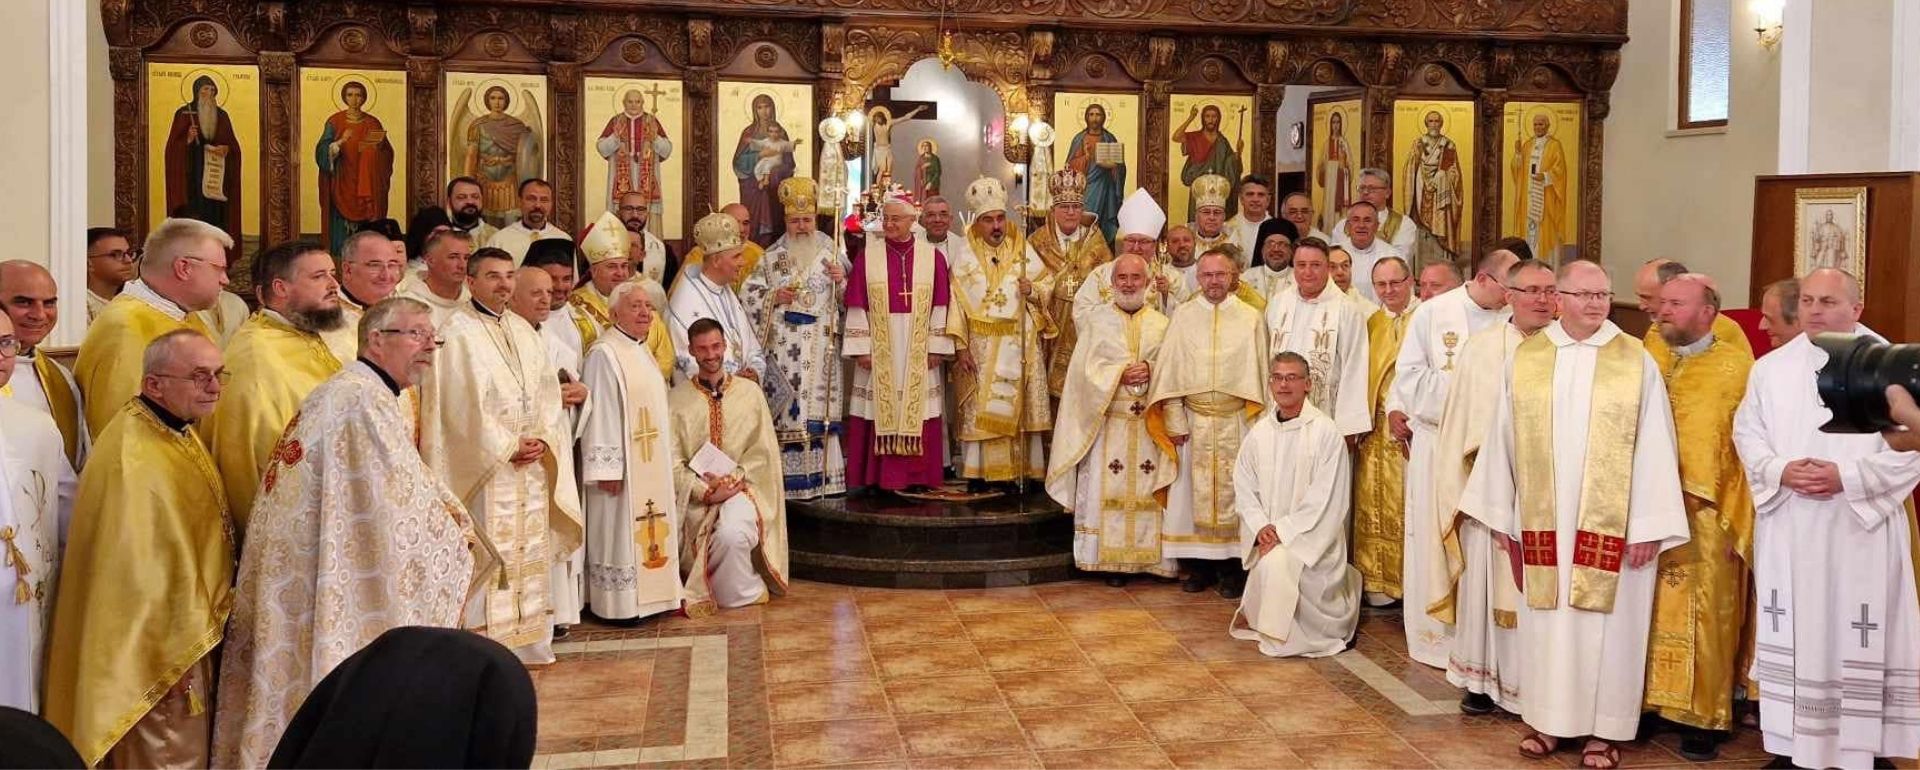 Mgr Petko Valov was ordained bishop for the eparchy ‘St. John XXIII’ in Sofia